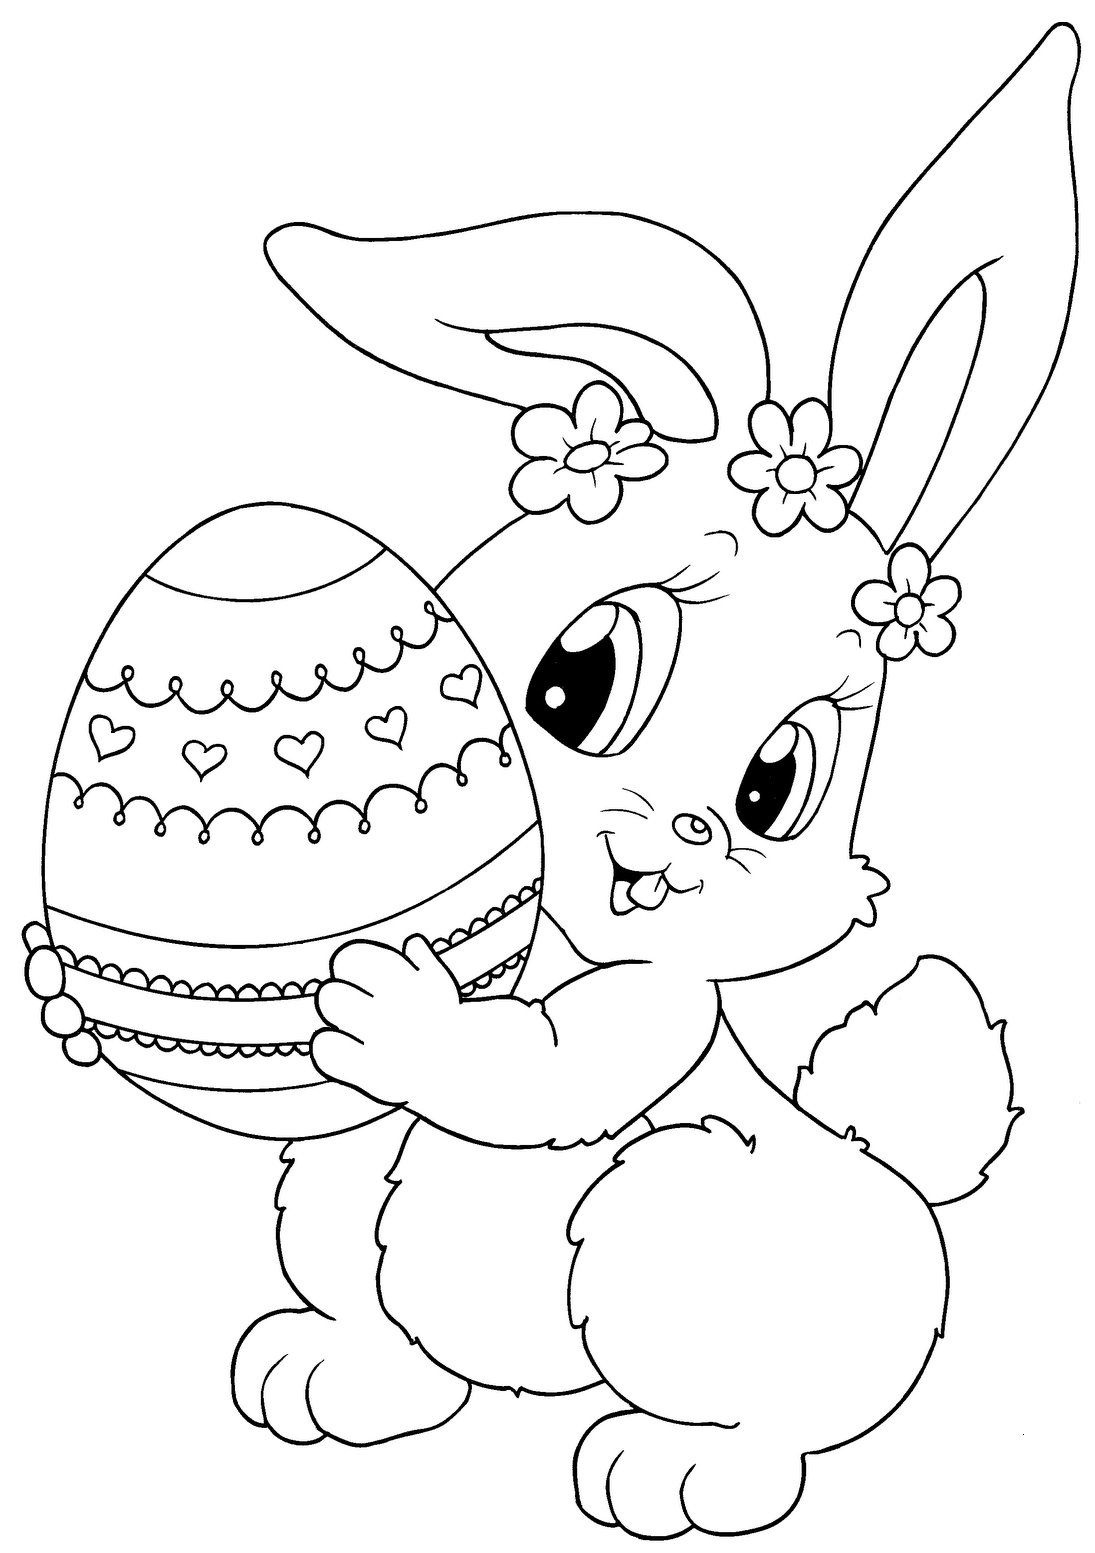 Easter Coloring Page | Spring Coloring Pages | Easter Bunny - Free Easter Color Pages Printable